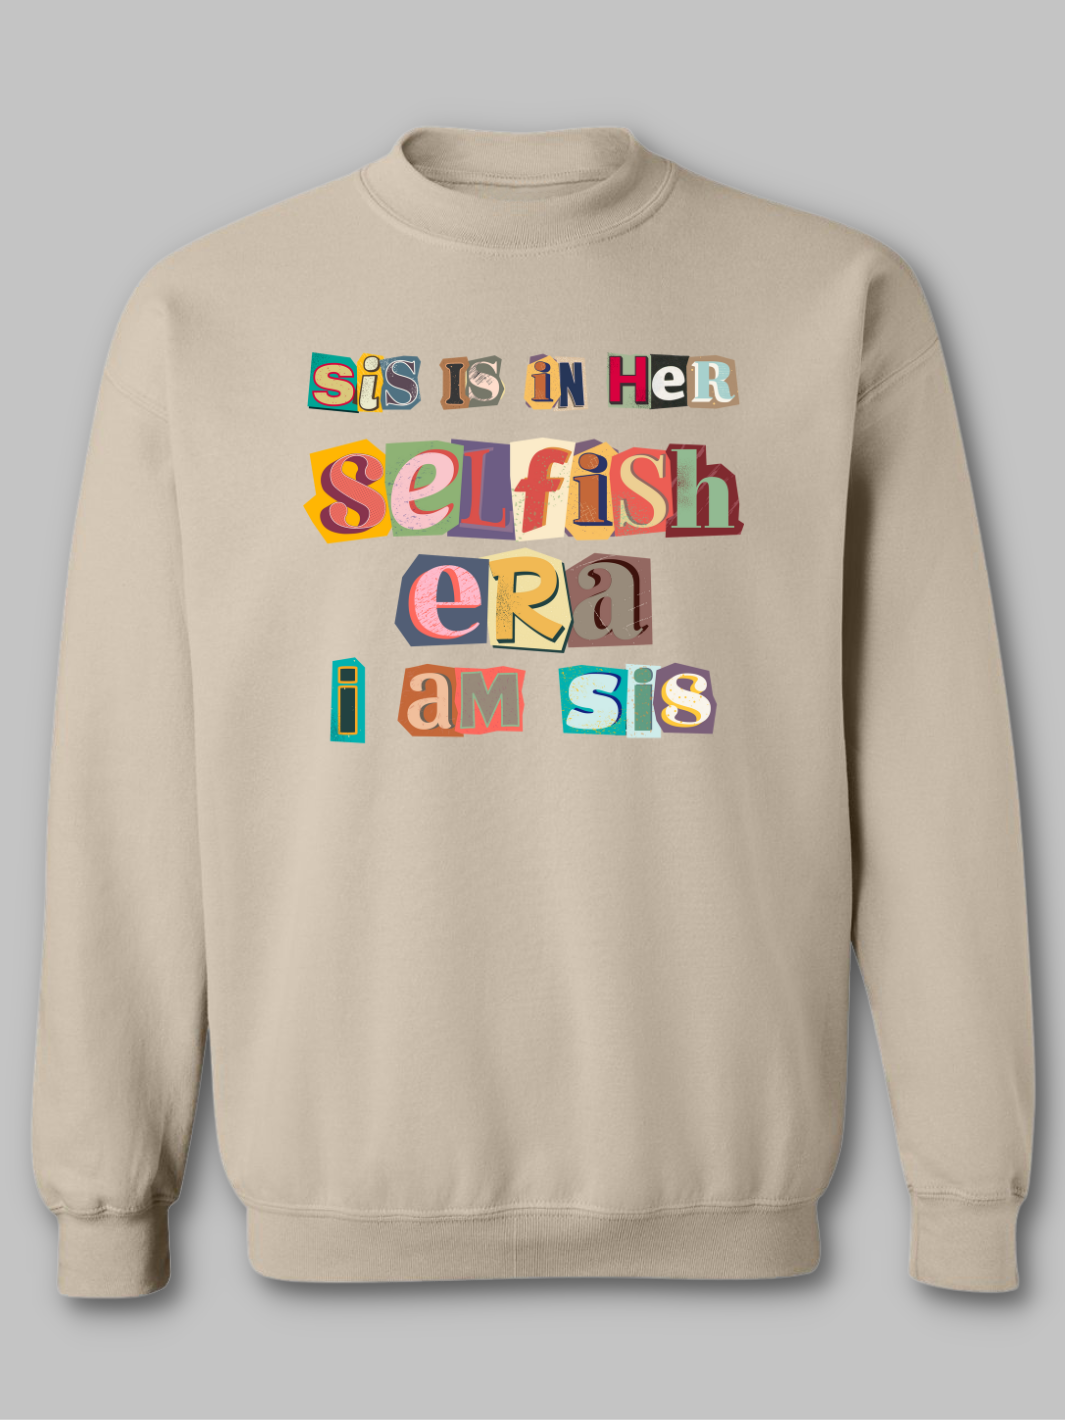 Image of a tan-colored crewneck sweatshirt featuring the phrase 'Sis in her Selfish era. I am Sis' in a unique, multicolored ripped paper font. The text, appearing as if it's made from torn pieces of paper in various colors, creates a dynamic and artistic effect against the neutral tan background. This design conveys a message of self-empowerment and individuality, with the playful and creative font adding a touch of whimsy and boldness to the statement. Self love sweatshirt self care sweatshirt